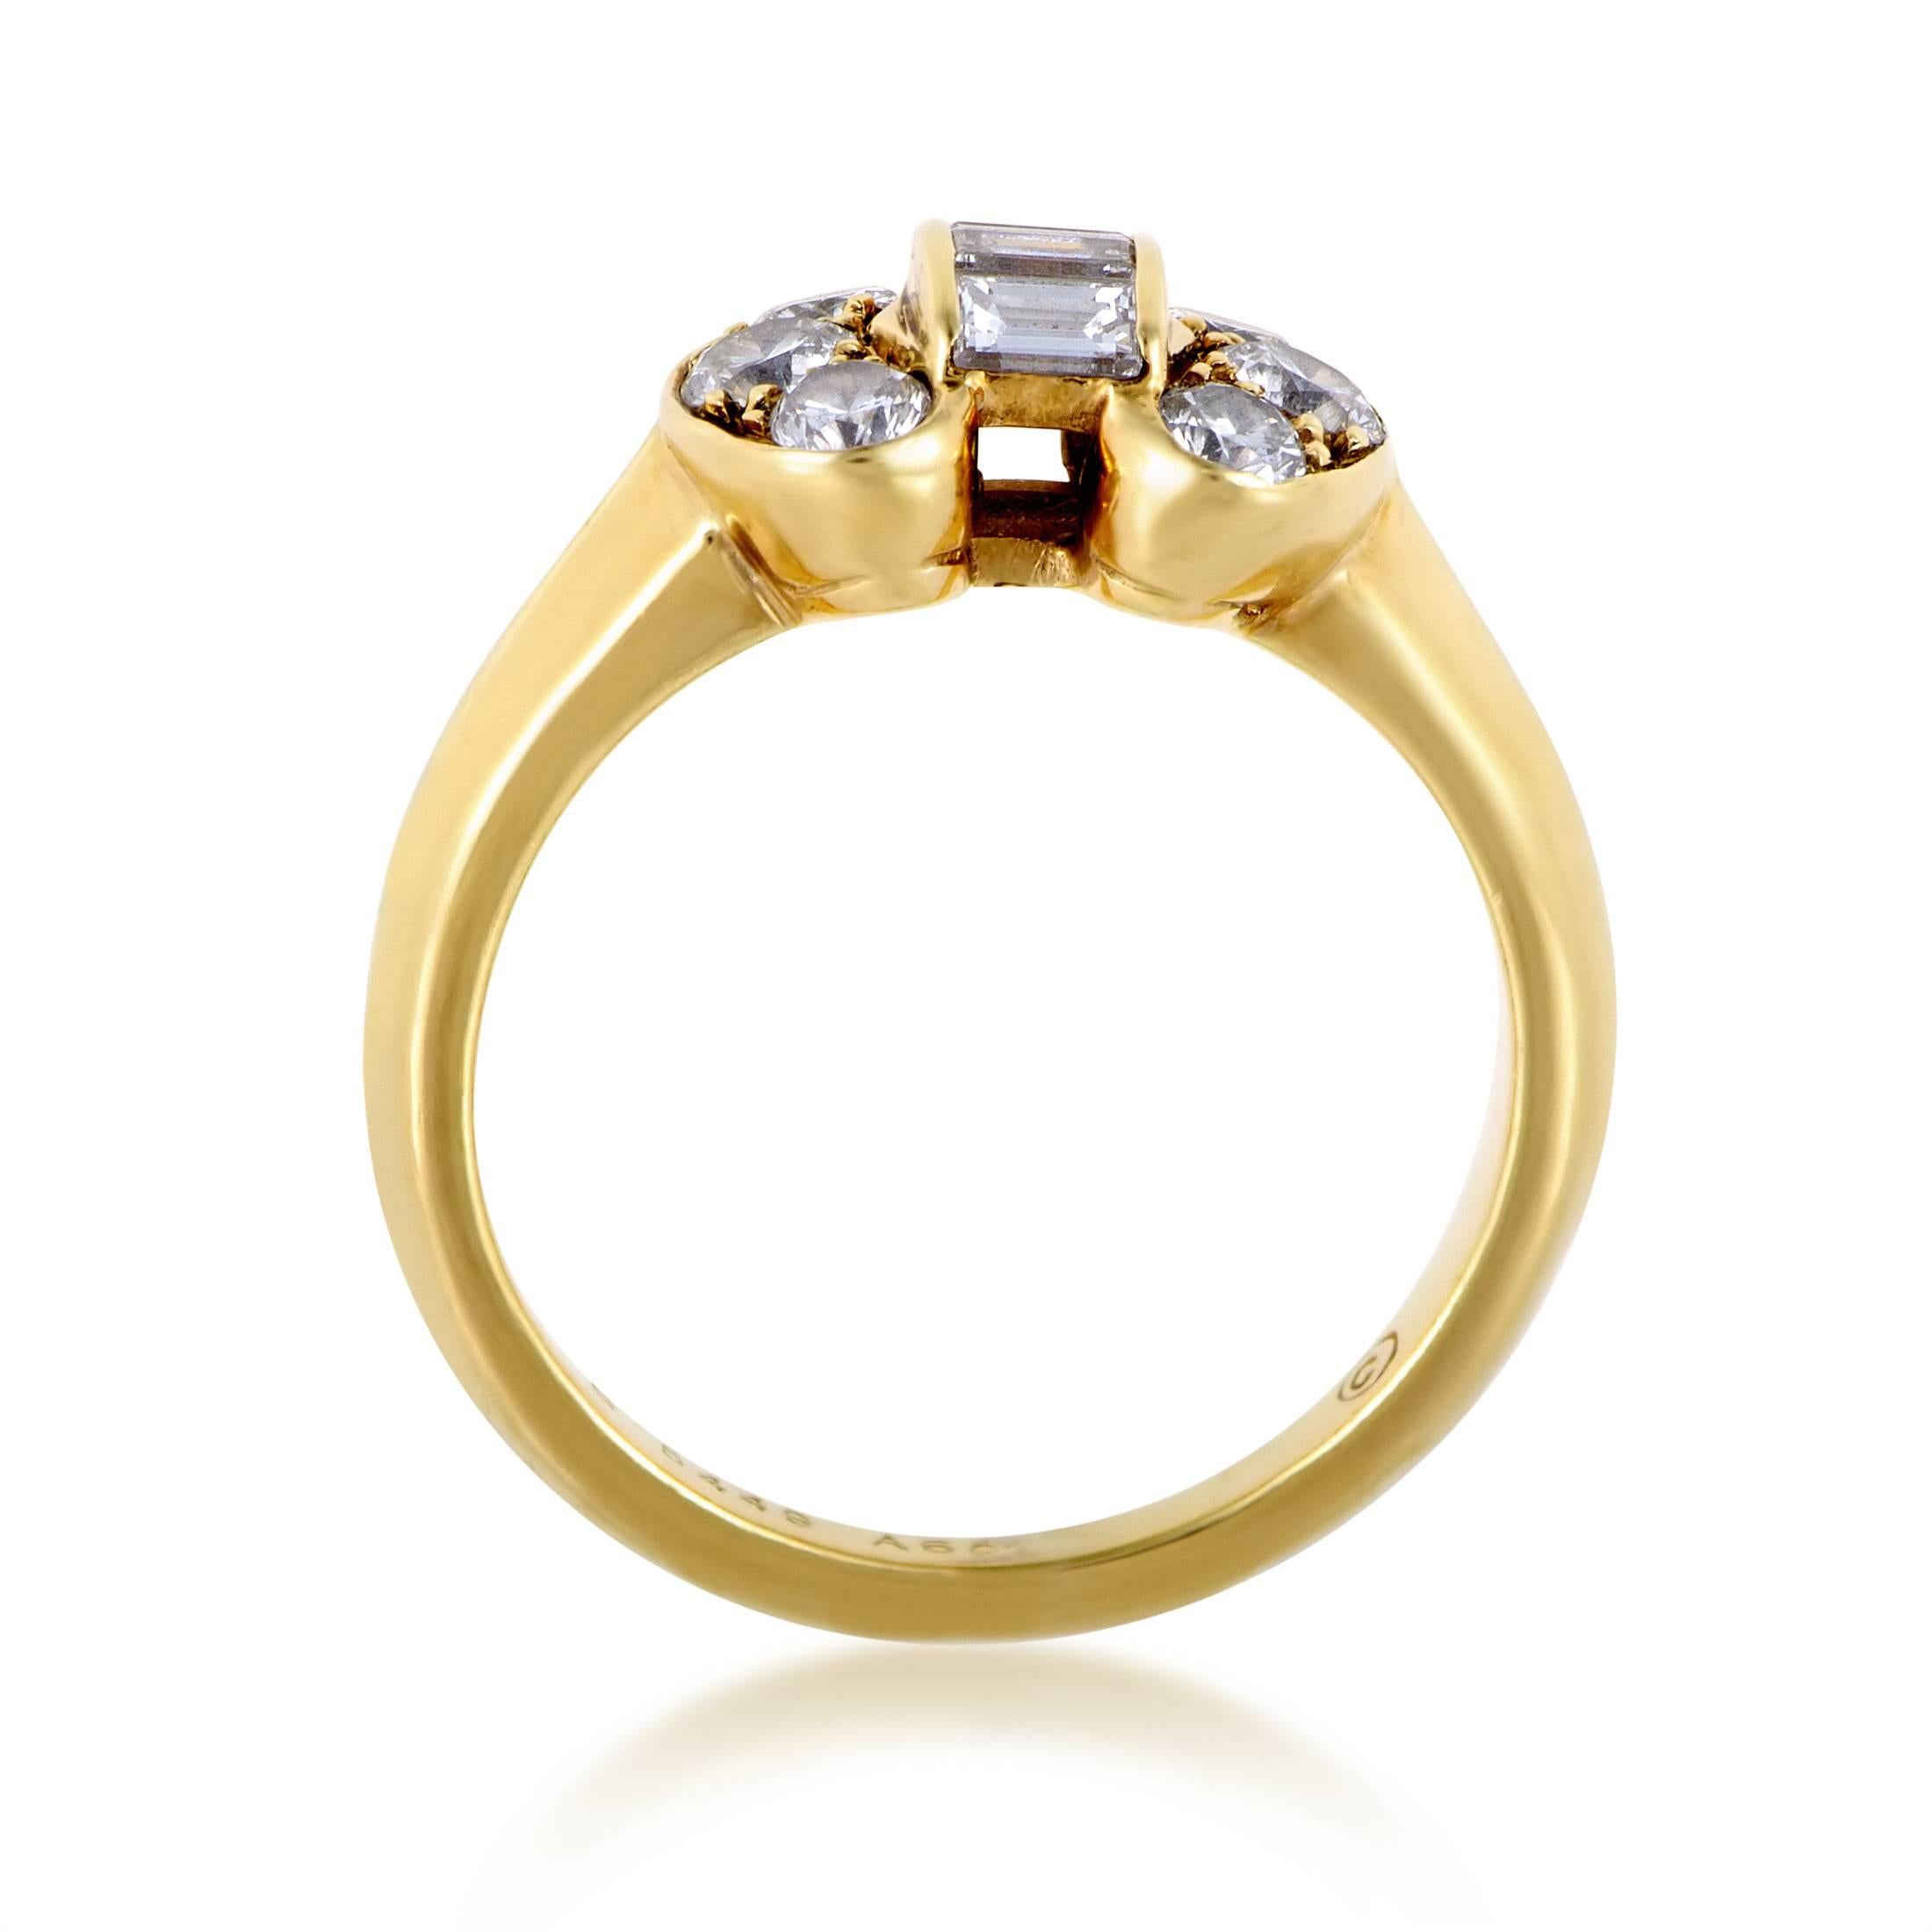 Diversely cut and arranged in a magnificent manner upon the fabulously radiant 18K yellow gold body, the sparkling diamonds weighing in total 0.50ct lend their everlasting glow to this enchanting ring from Van Cleef & Arpels.
Ring Size: 5.5 (50